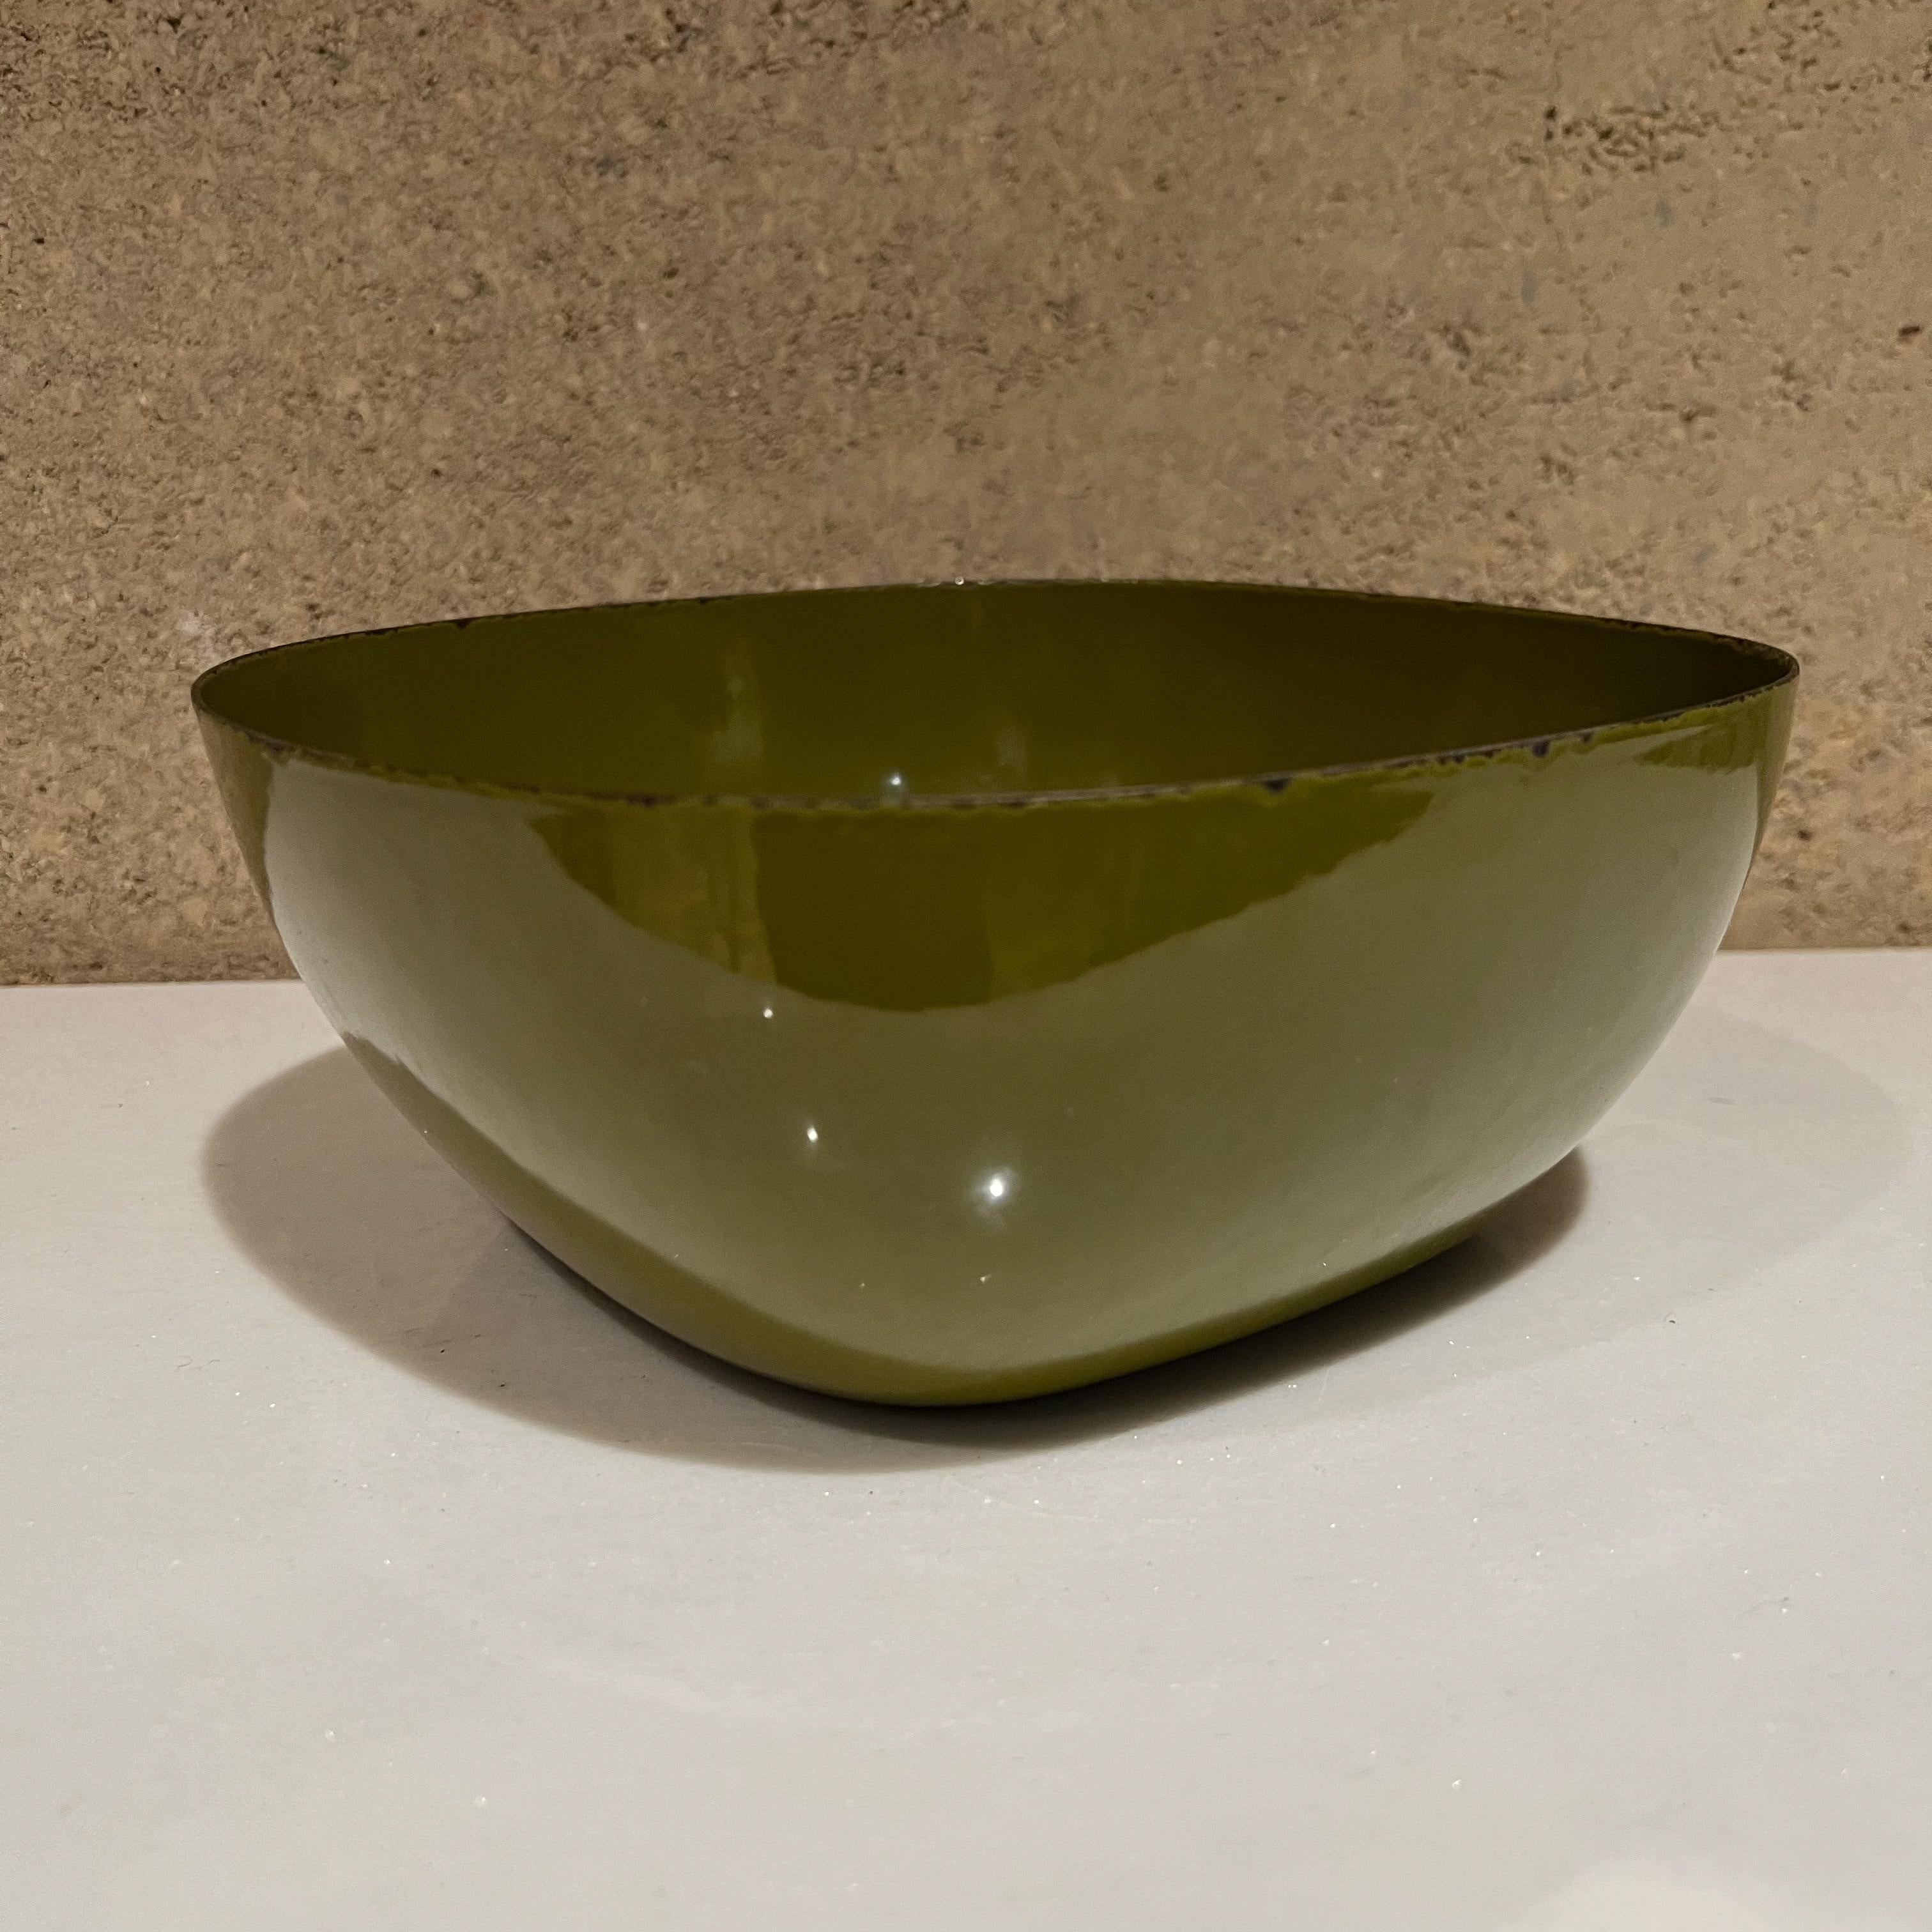 Cathrineholm Green Bowl Holland
Modern midcentury bowl in a square shape with round corners. 
Avocado Green. 
Signed by maker
3.5 tall x 8.25 x 8.25
Preowned original unrestored vintage condition.
See images provided please.